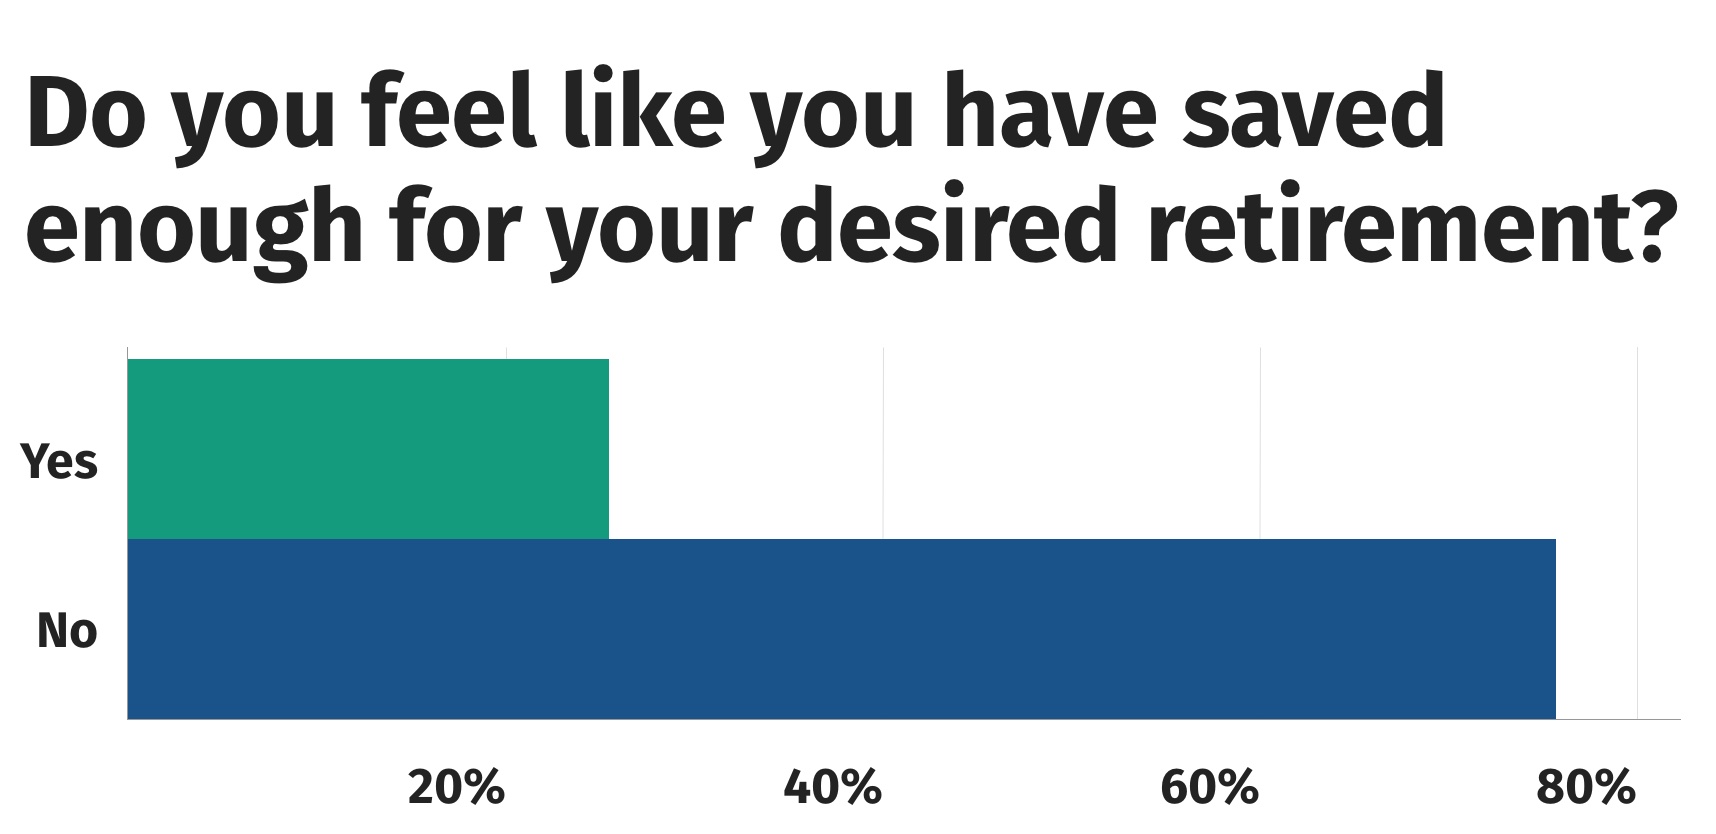 Do you feel like you have saved enough for your desired retirement?